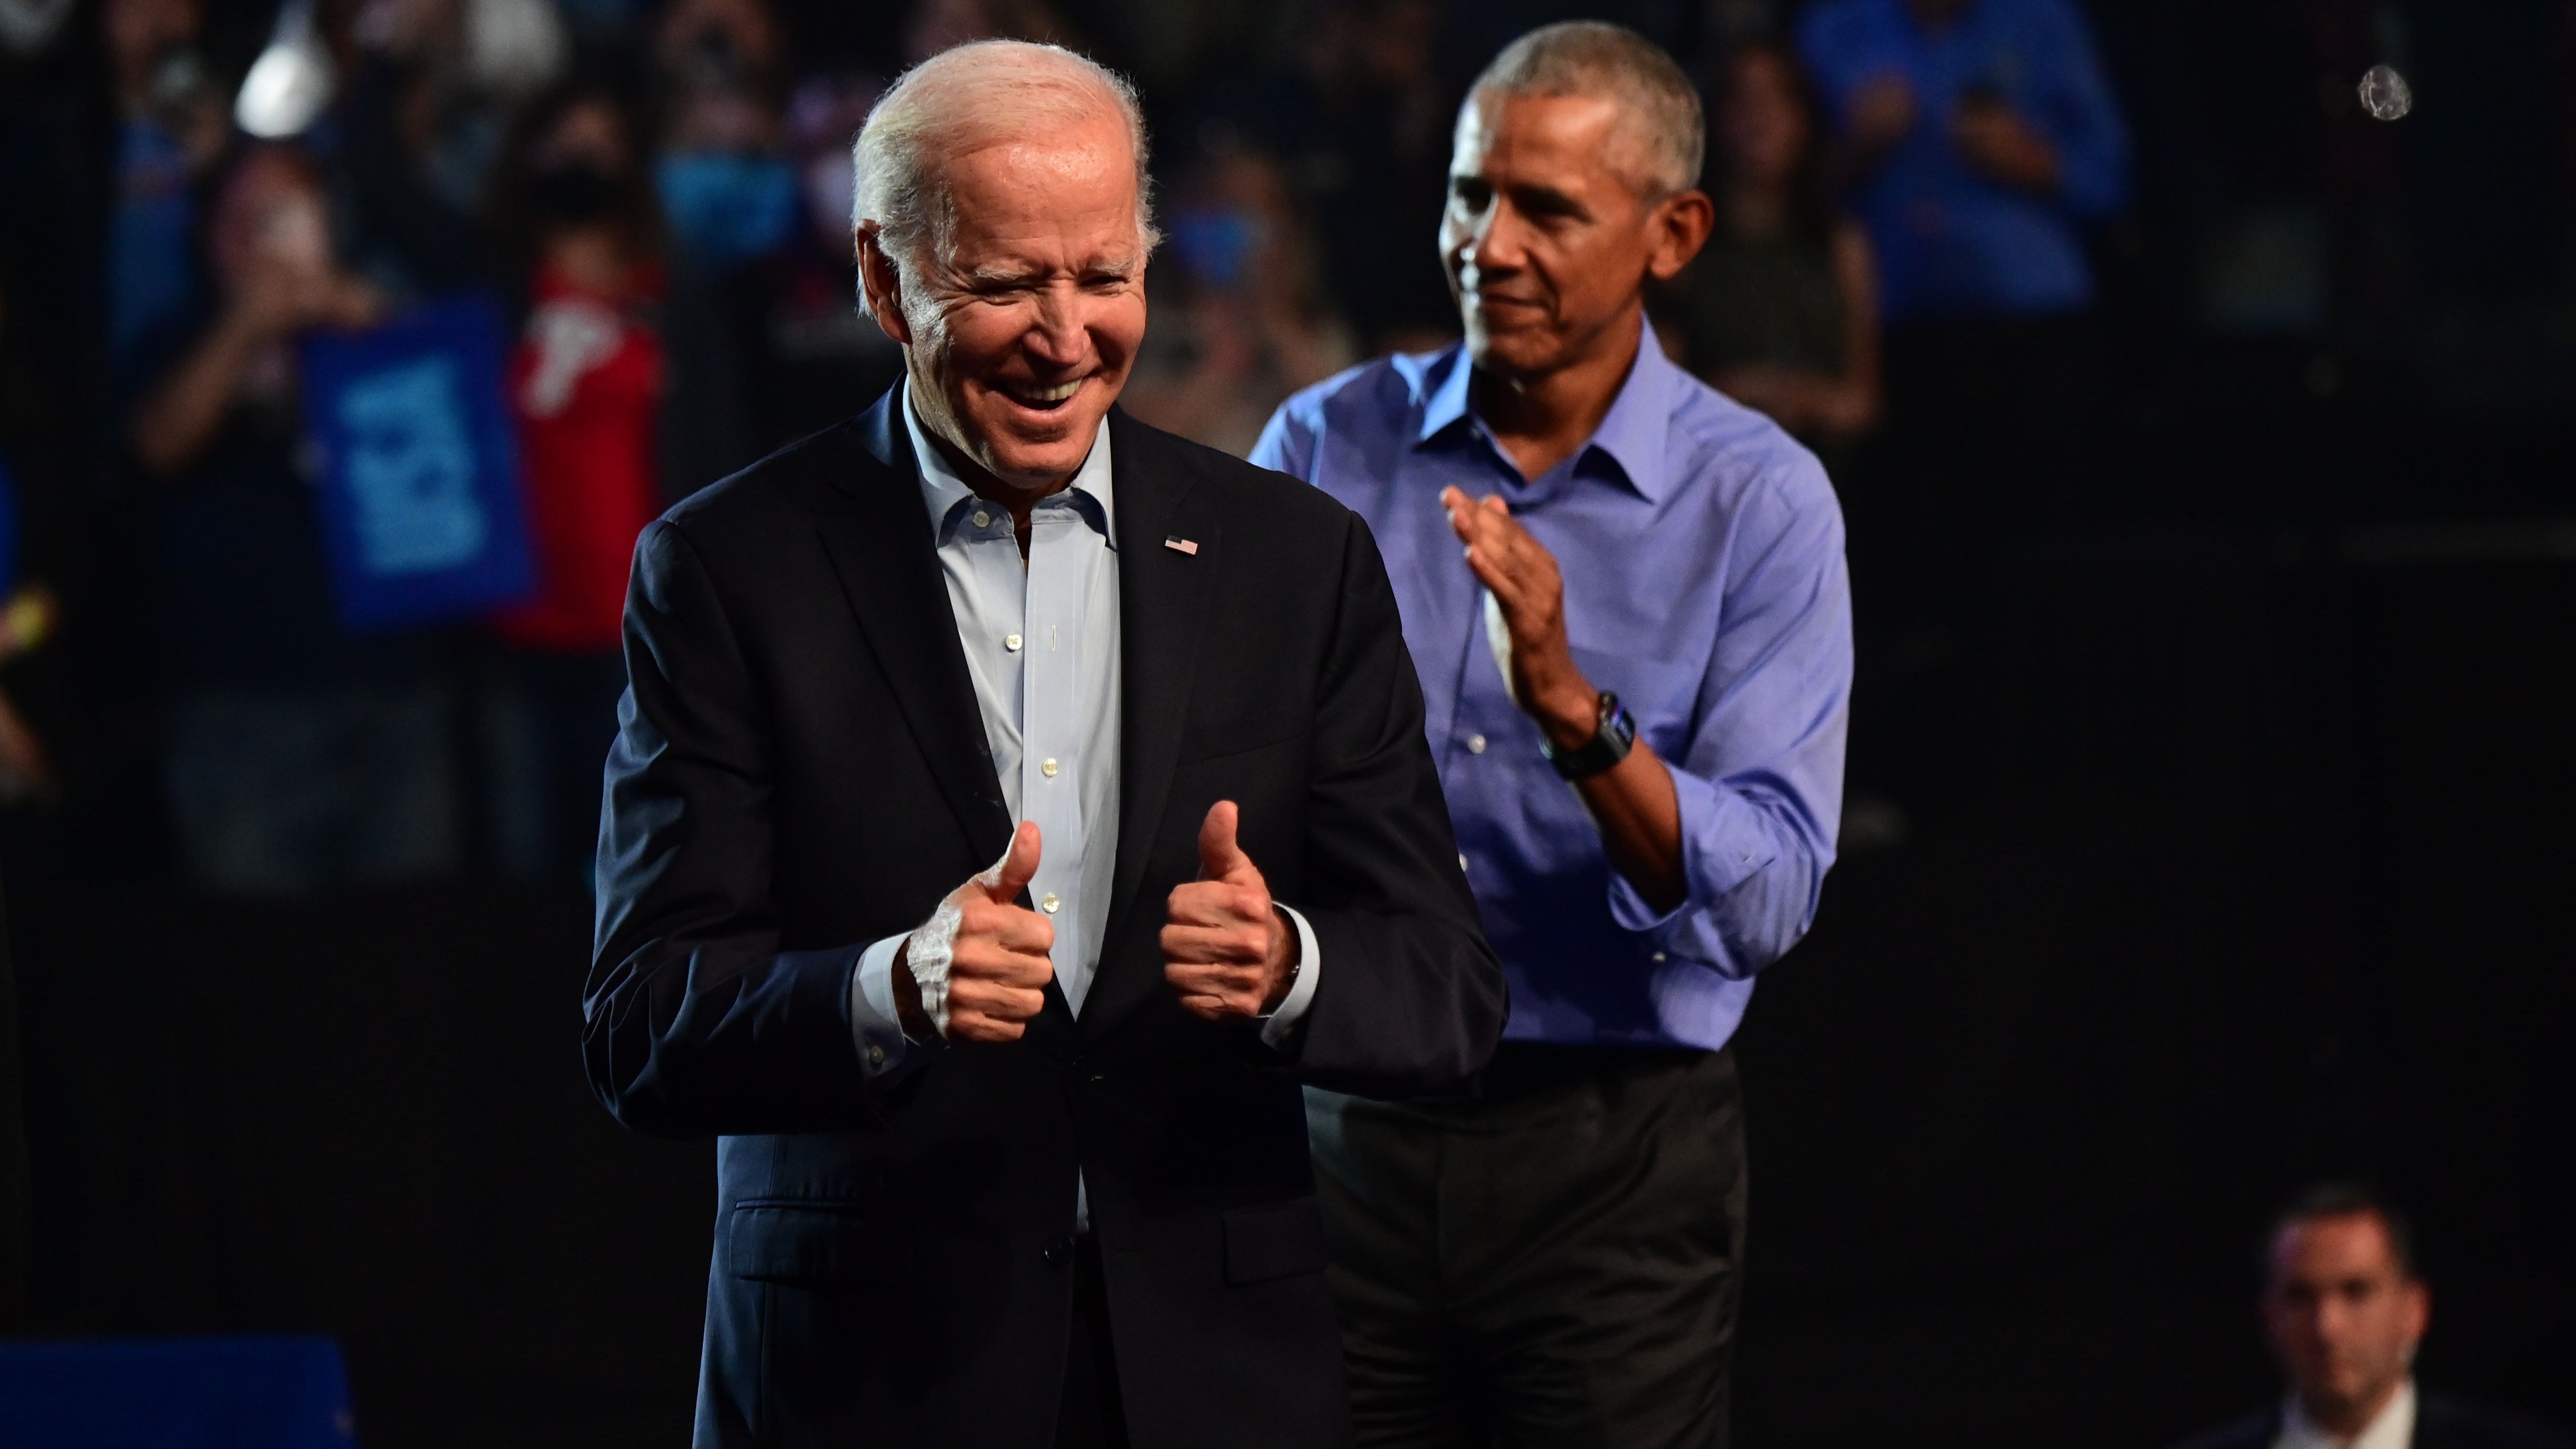 Obama and Biden turn to TikTok in search of the young vote in the US legislative elections.